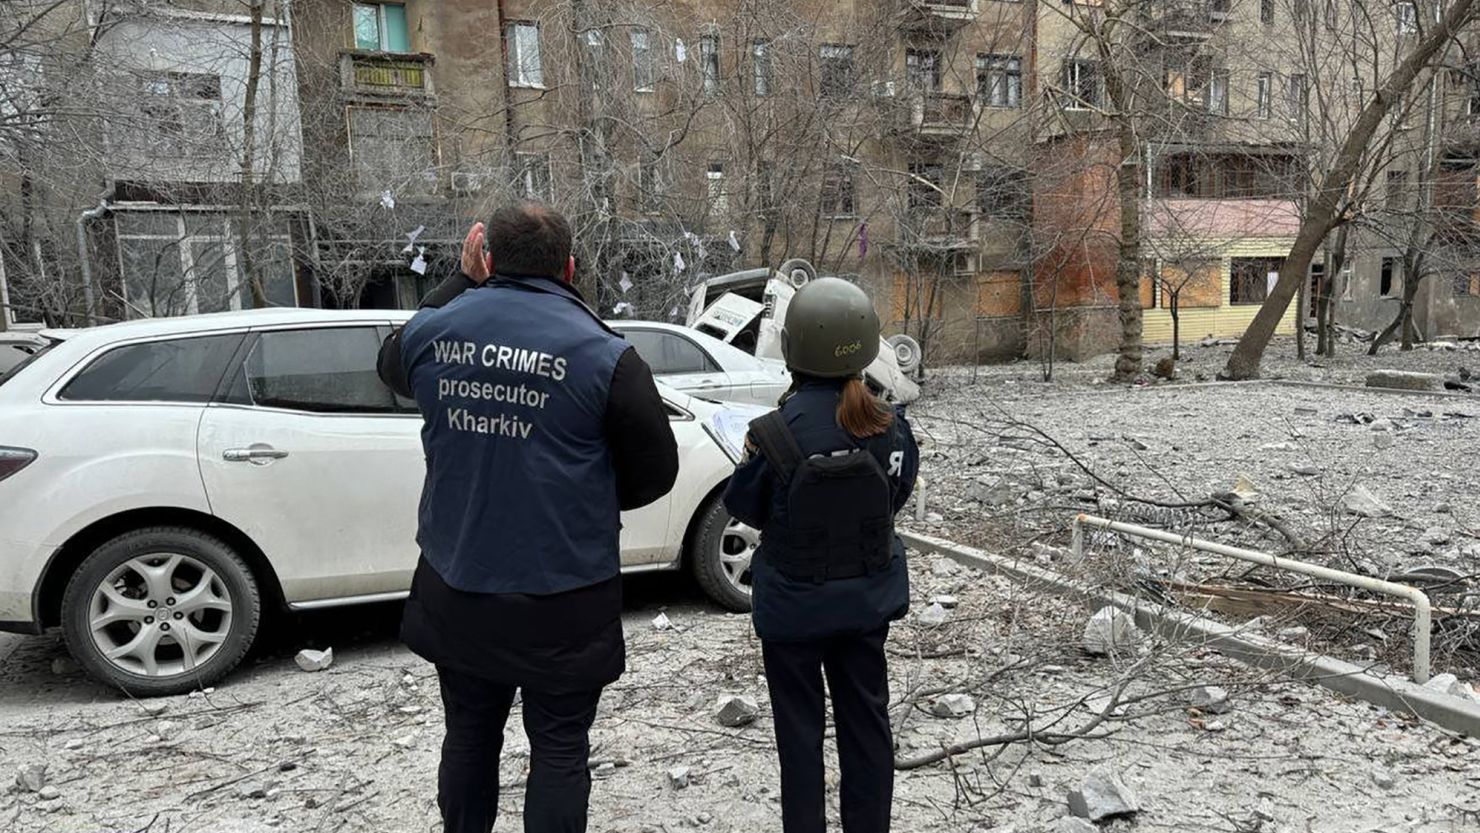 Ukrainian Prosecutor Generalís office launched an investigation into the strike in Kharkiv city.